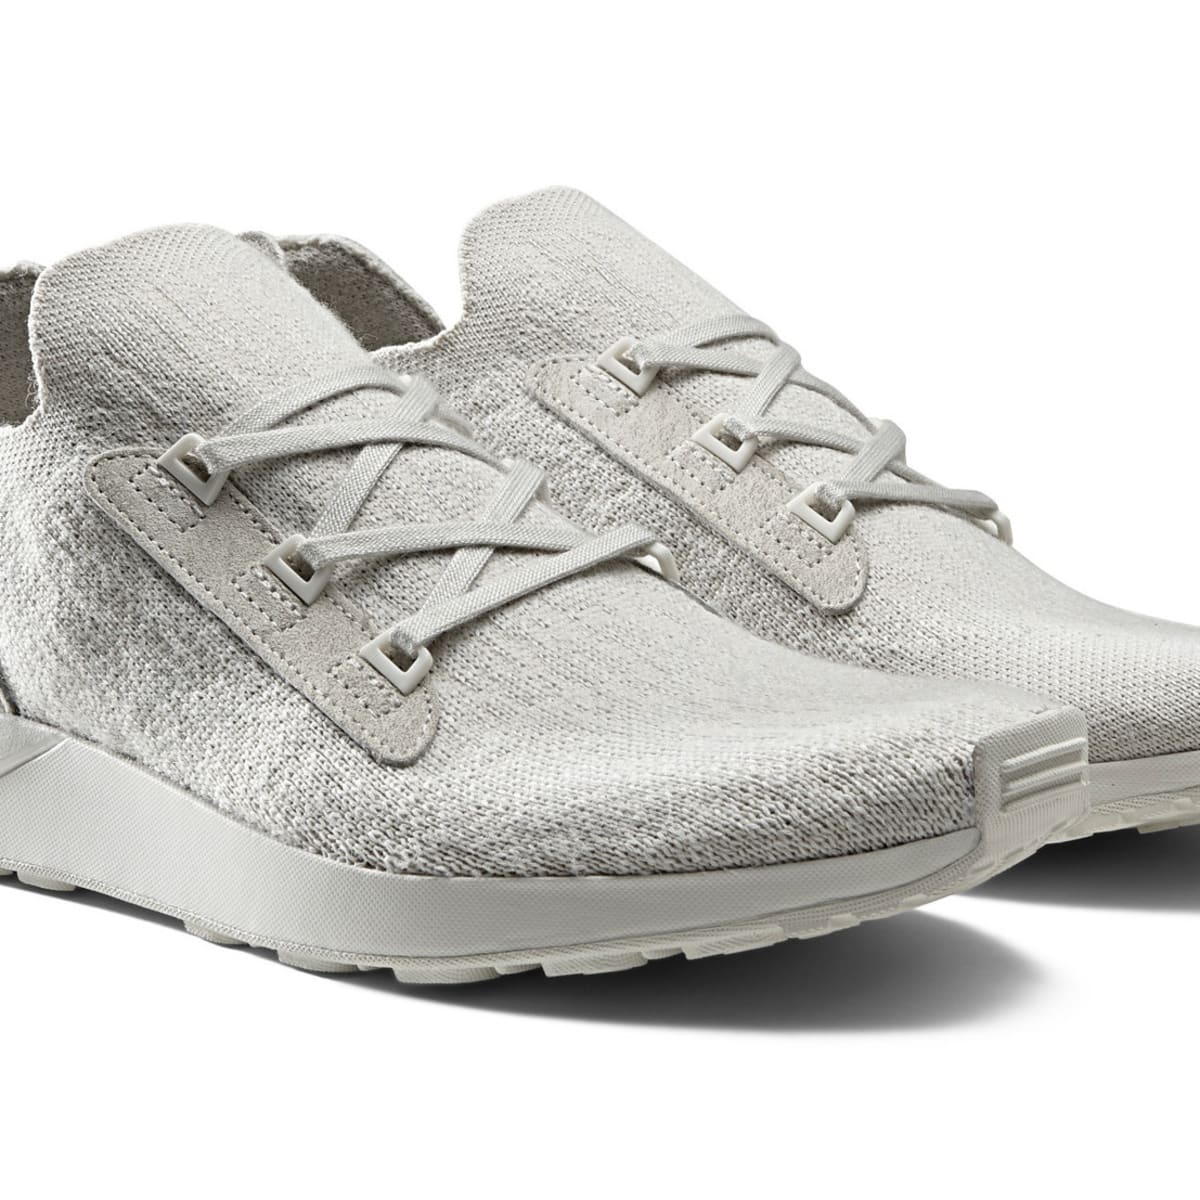 Terrible sobras caballo de fuerza Out Today: Adidas Originals By Wings+Horns Gazelle 85 and ZX Flux ADV -  Acquire